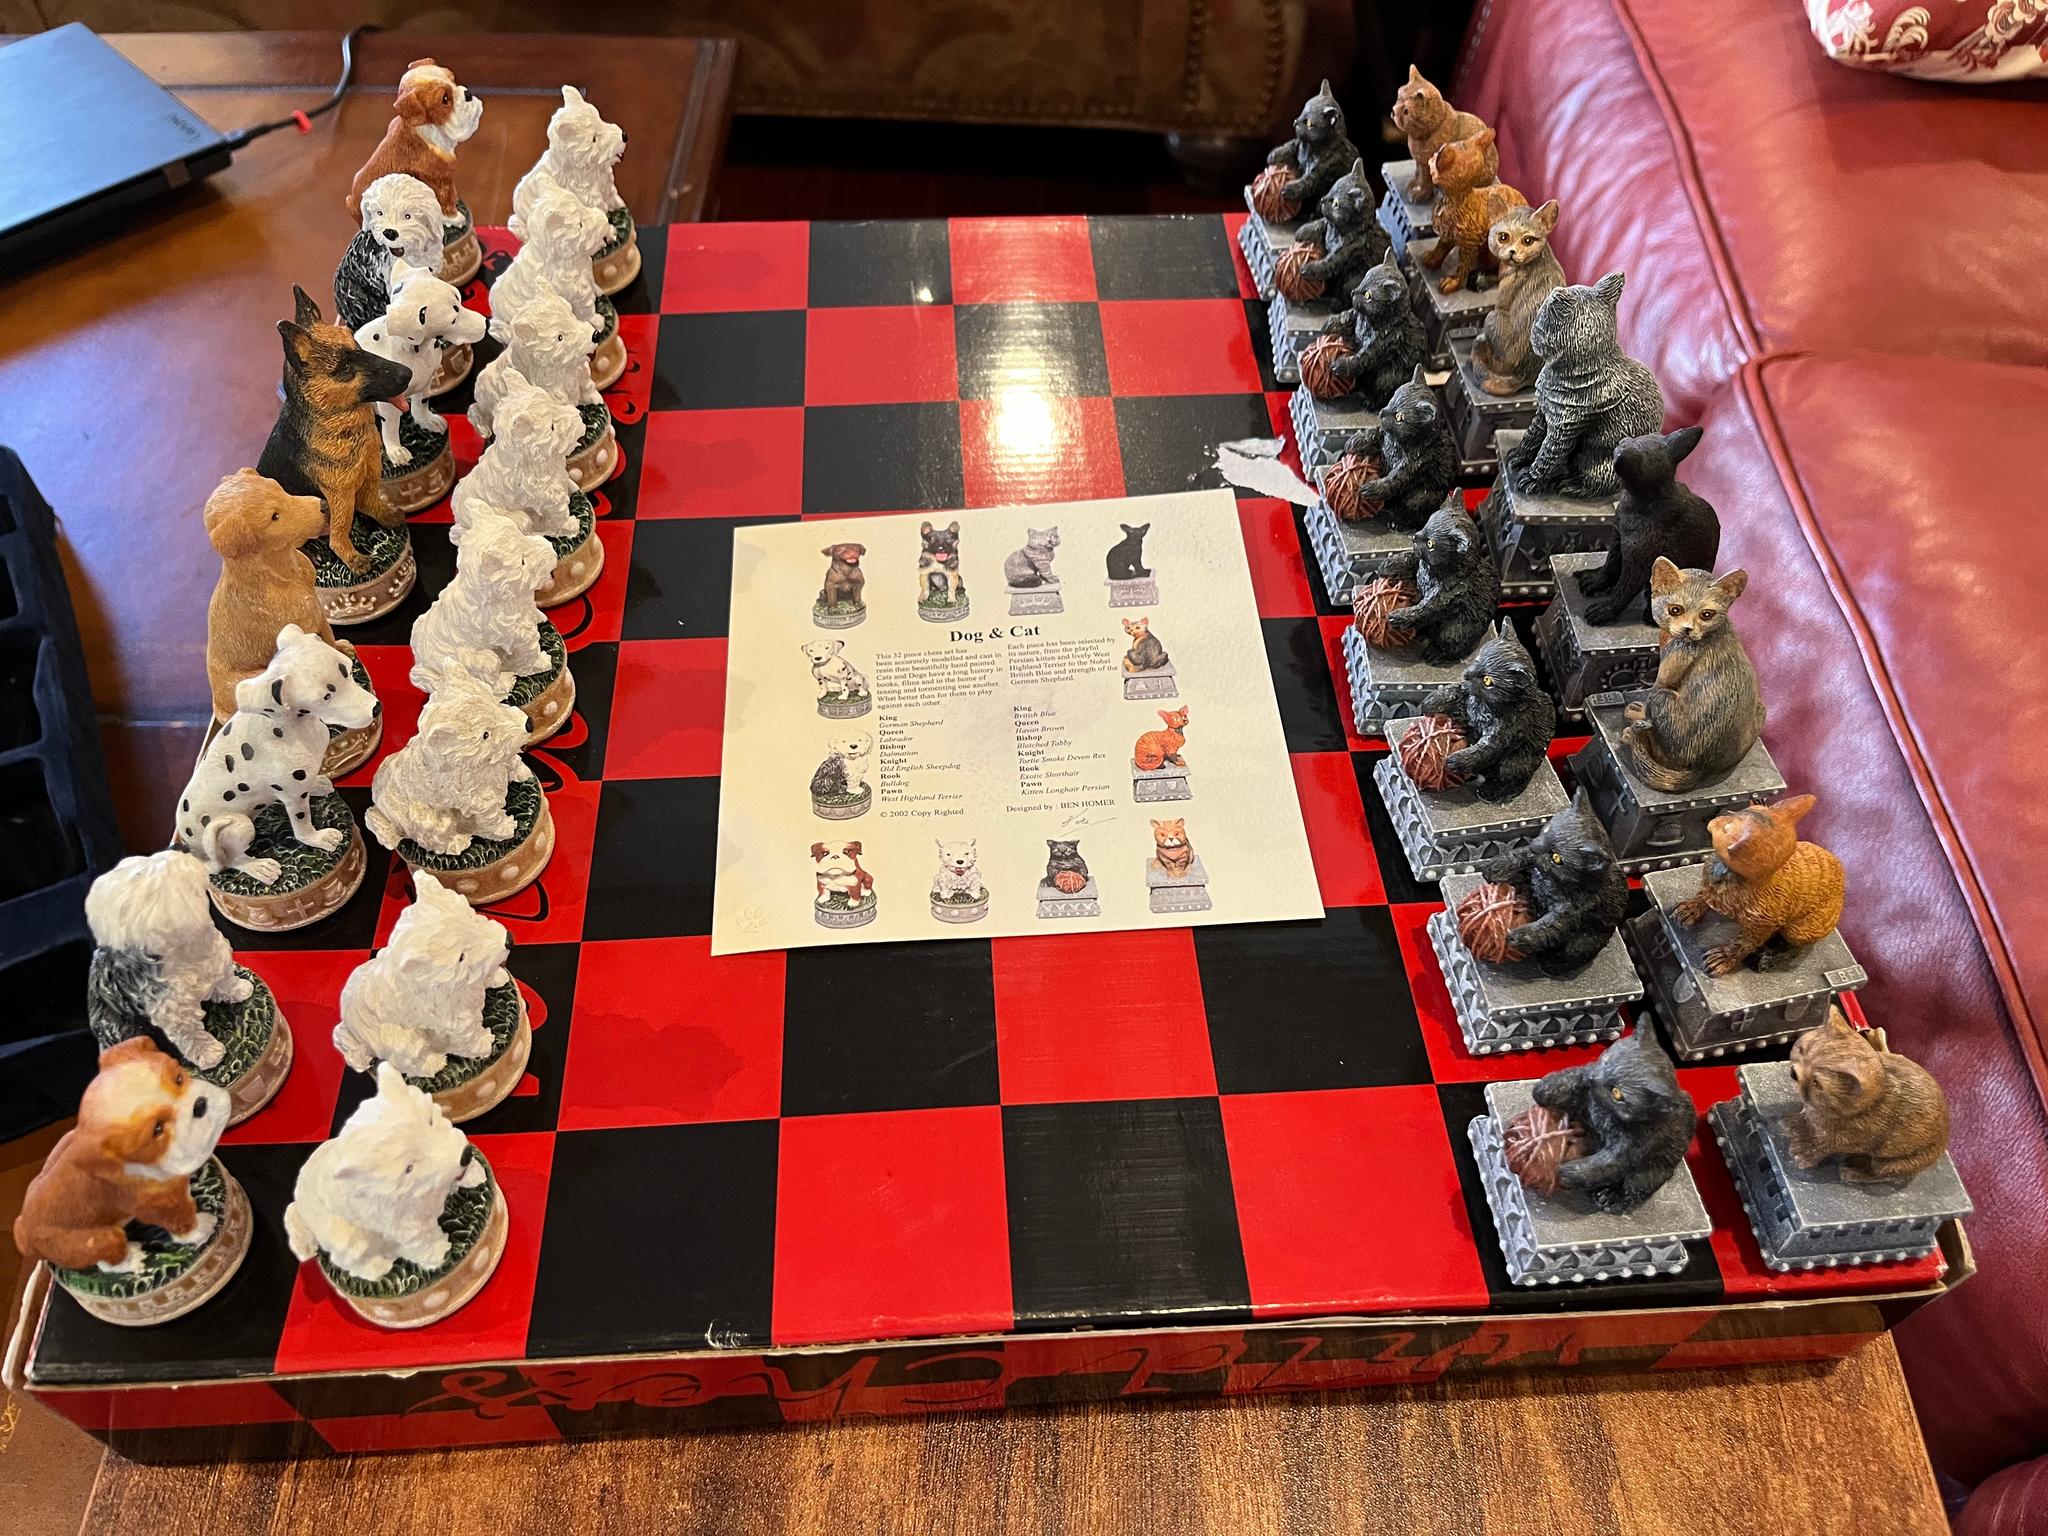 Cats and Dogs chess pieces on original container.